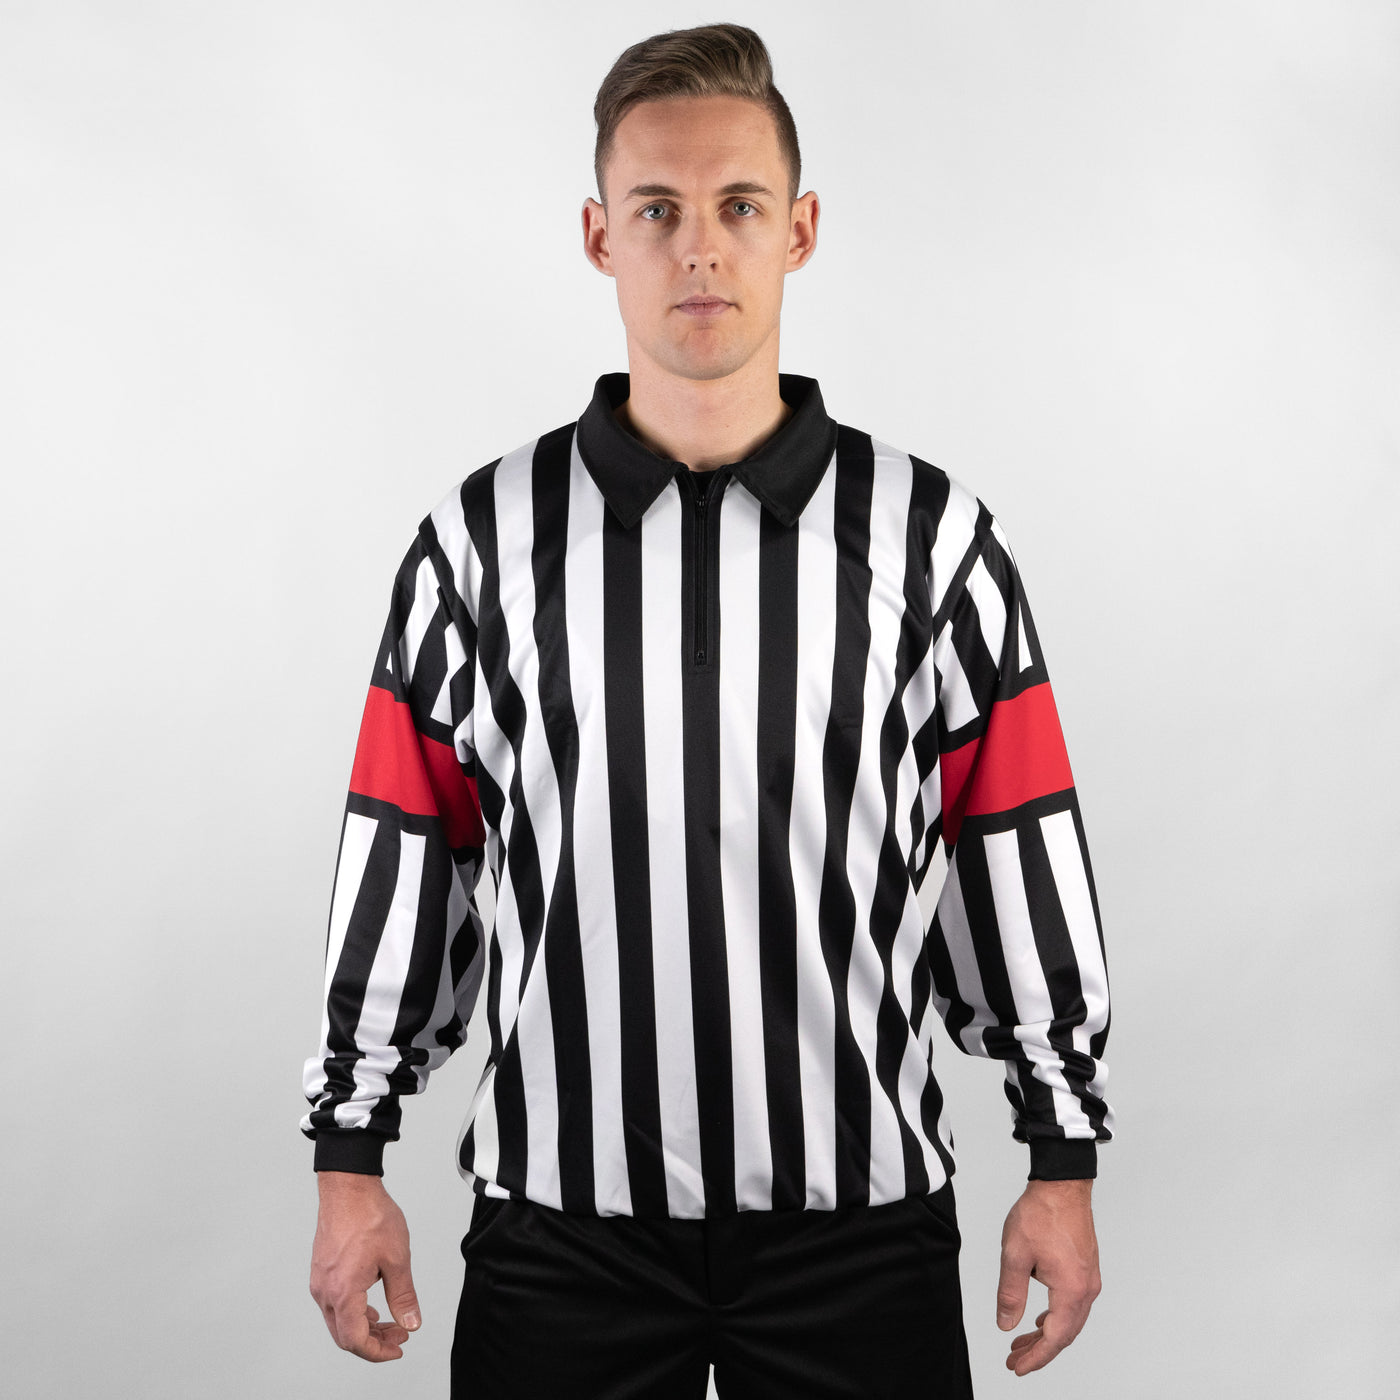 Zebrasclub ZR1 hockey referee jersey with sublimated red arm bands